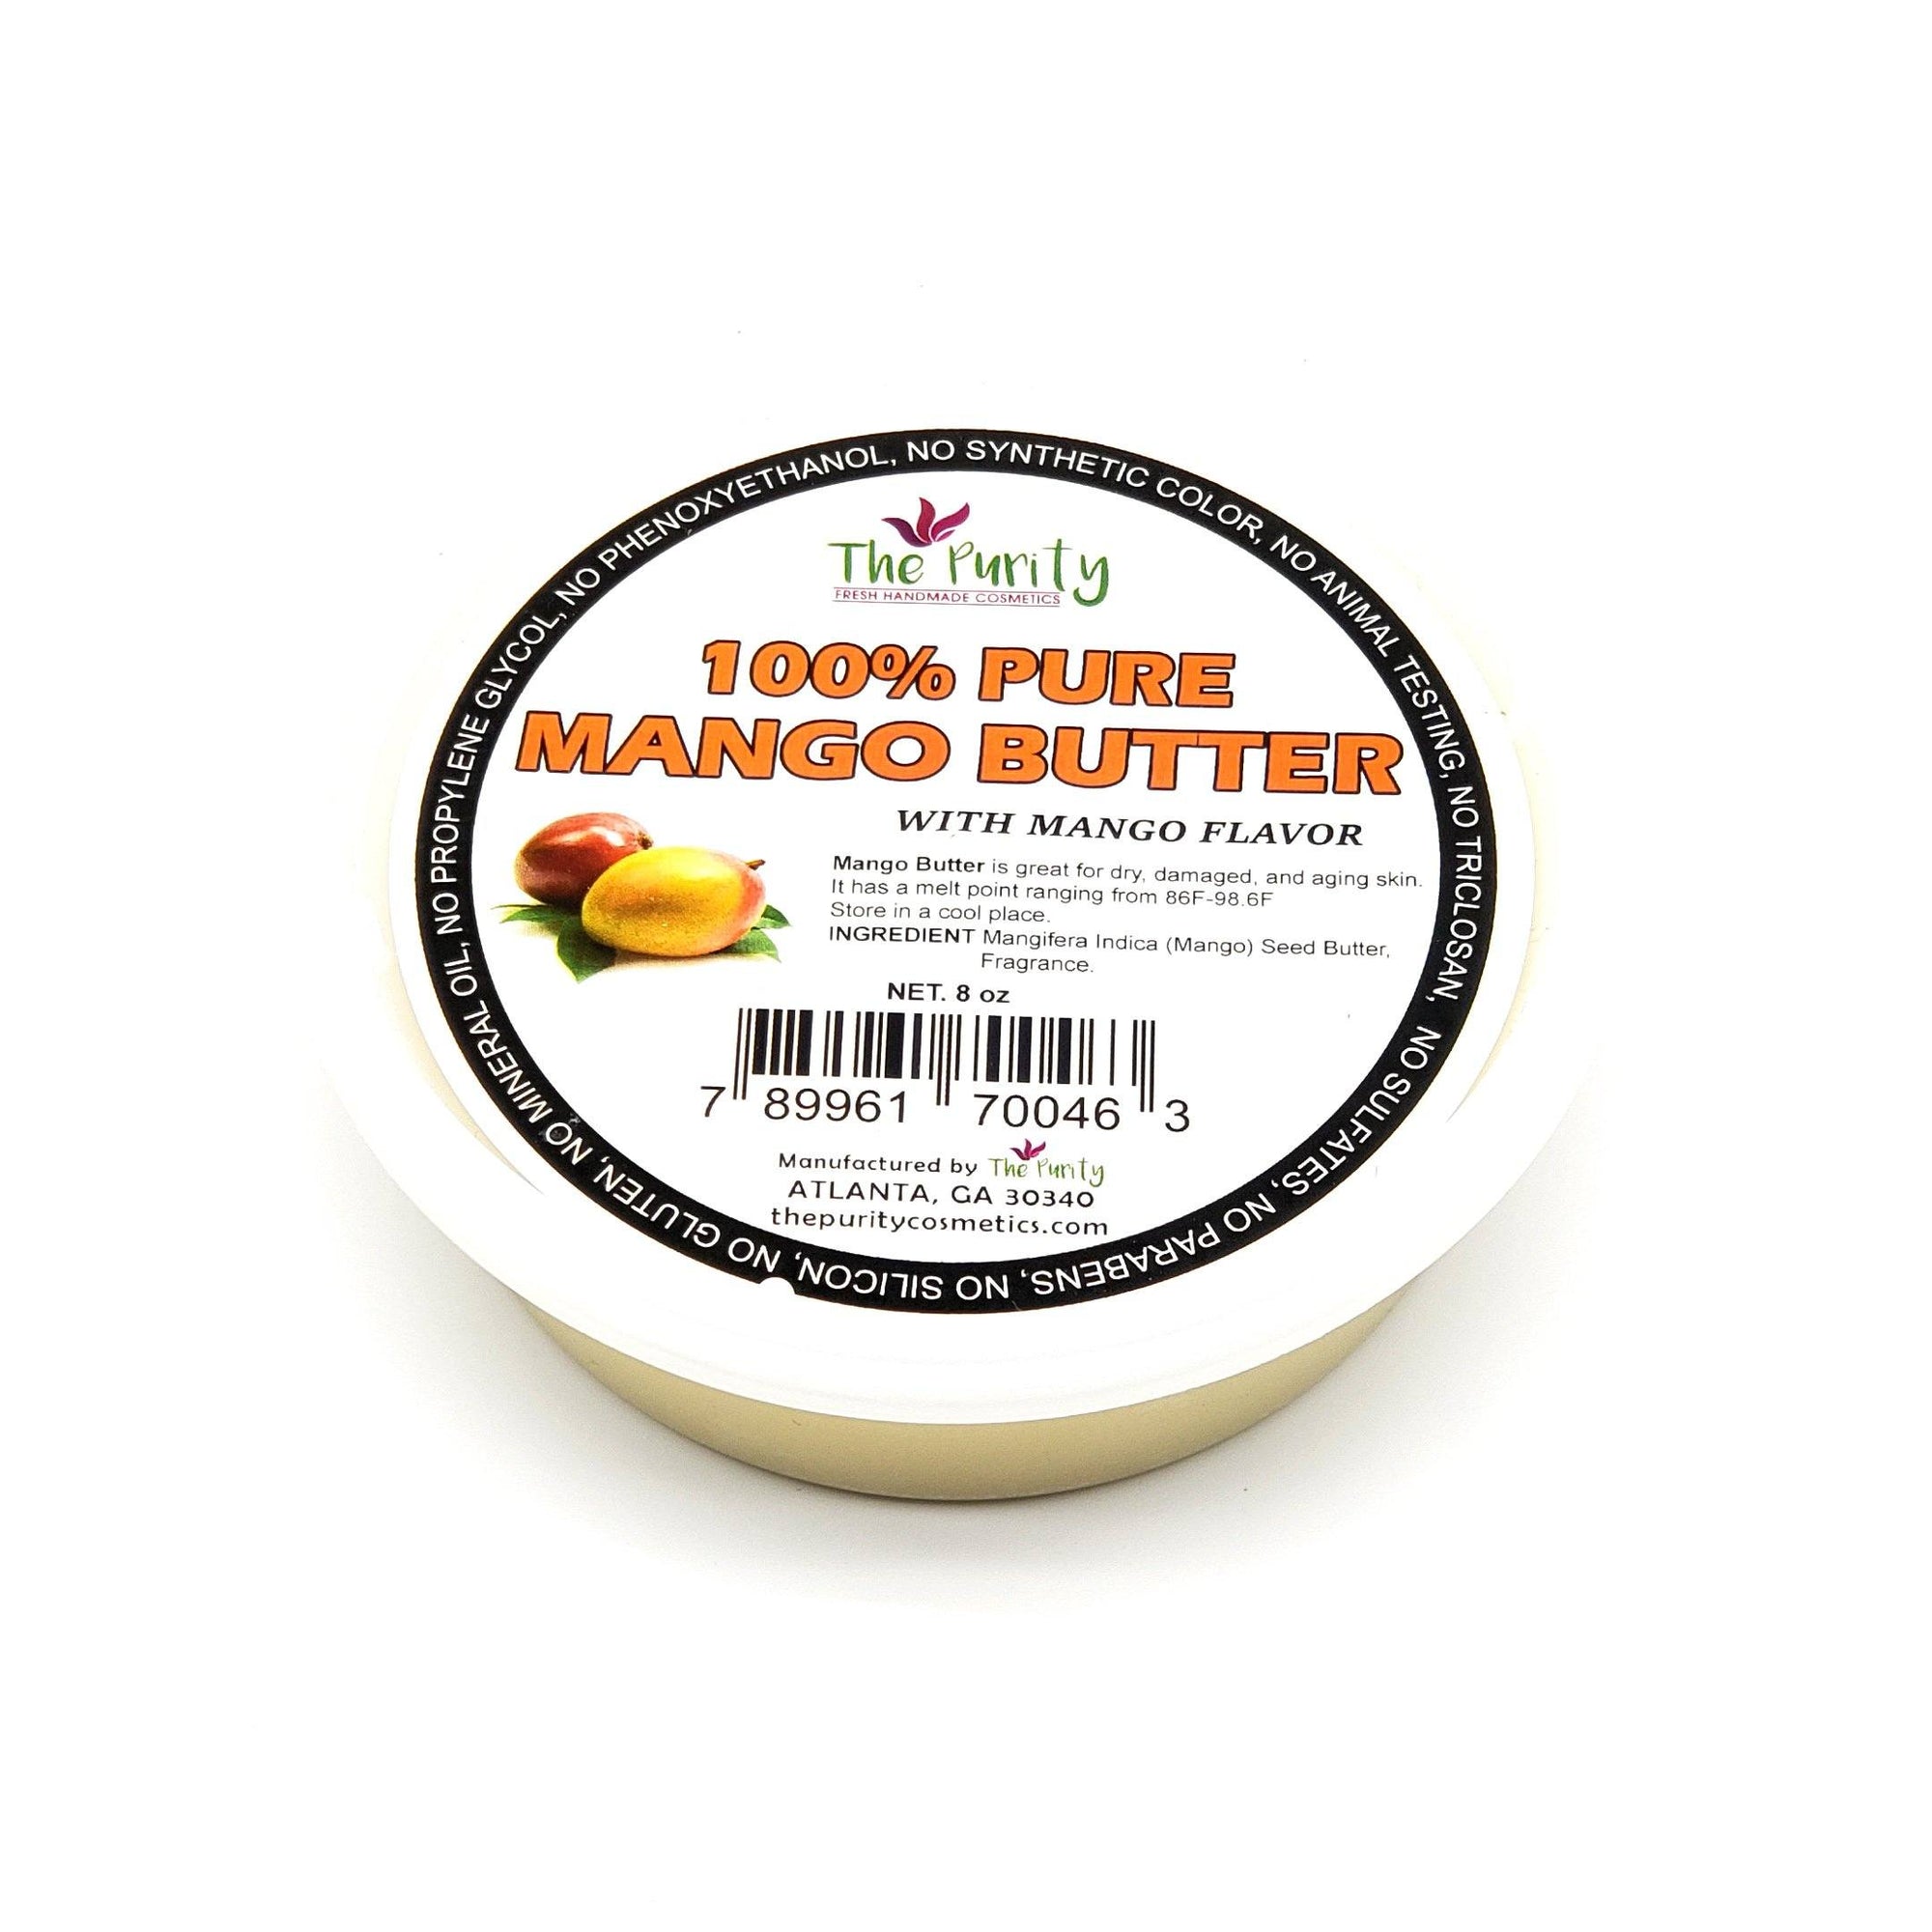 The Purity 100% PURE MANGO BUTTER (PC)